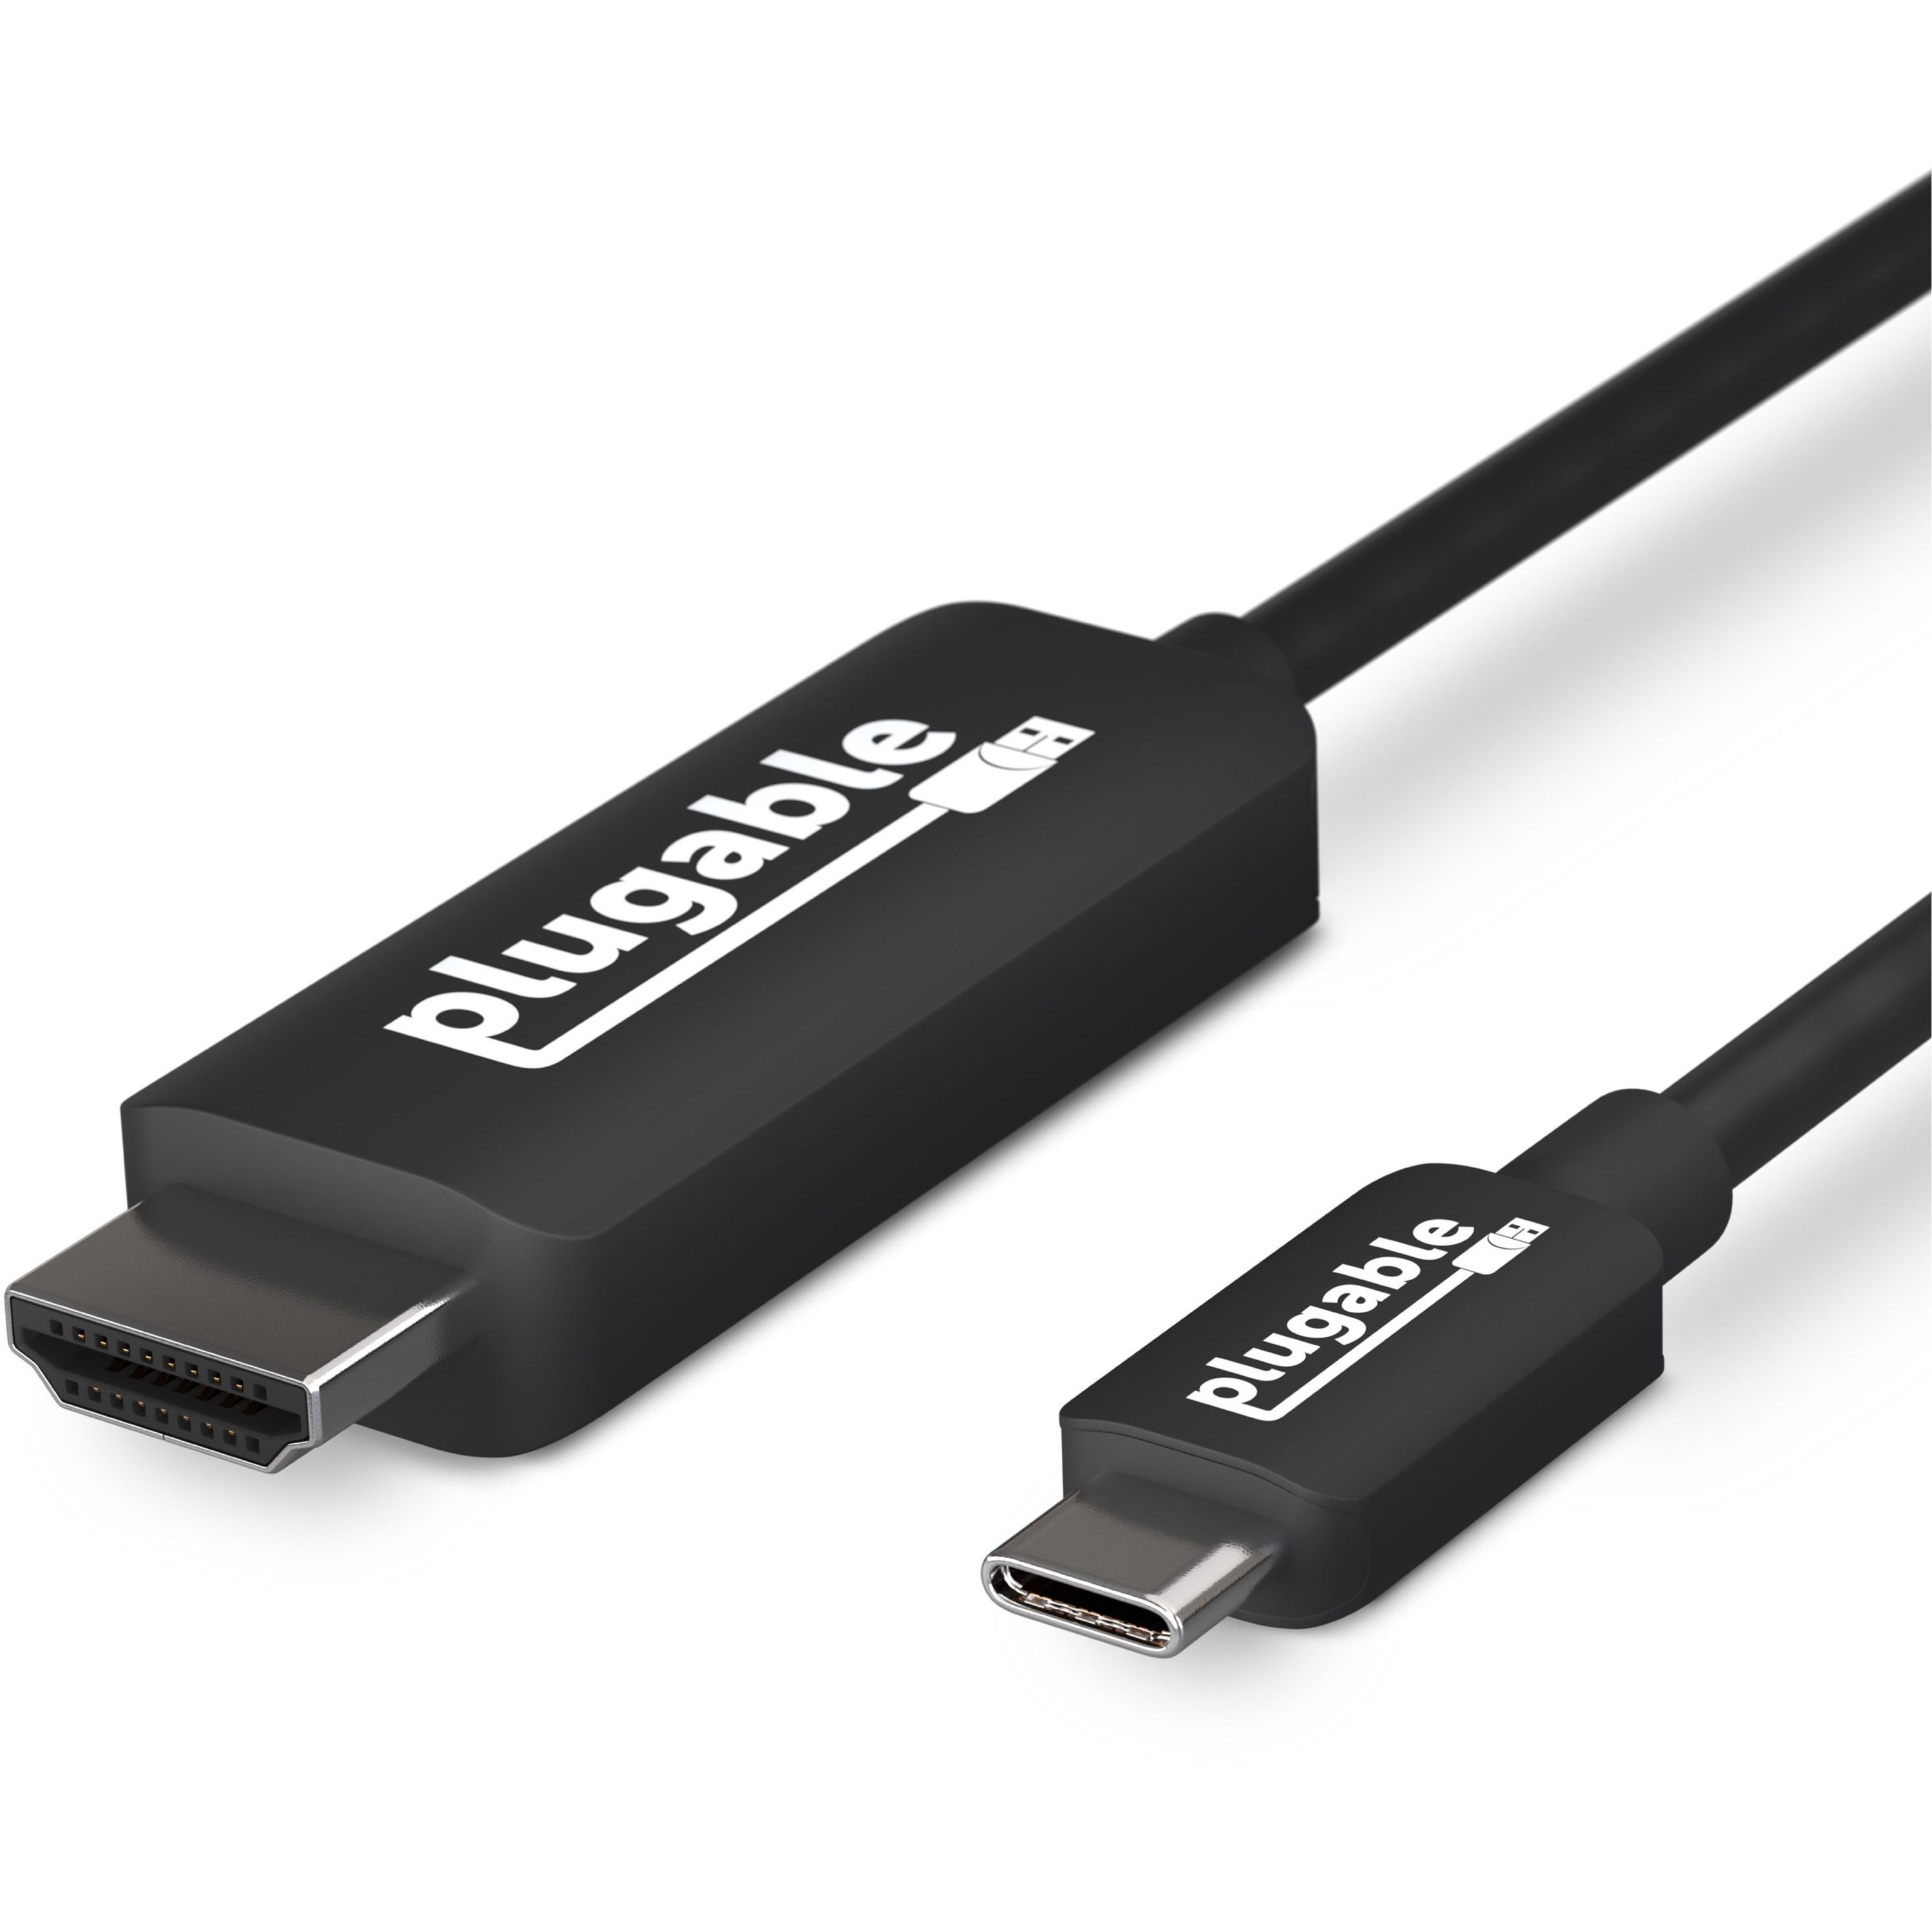 Plugable USB C to HDMI Adapter Cable USBC-HDMI-CABLE Tech-America